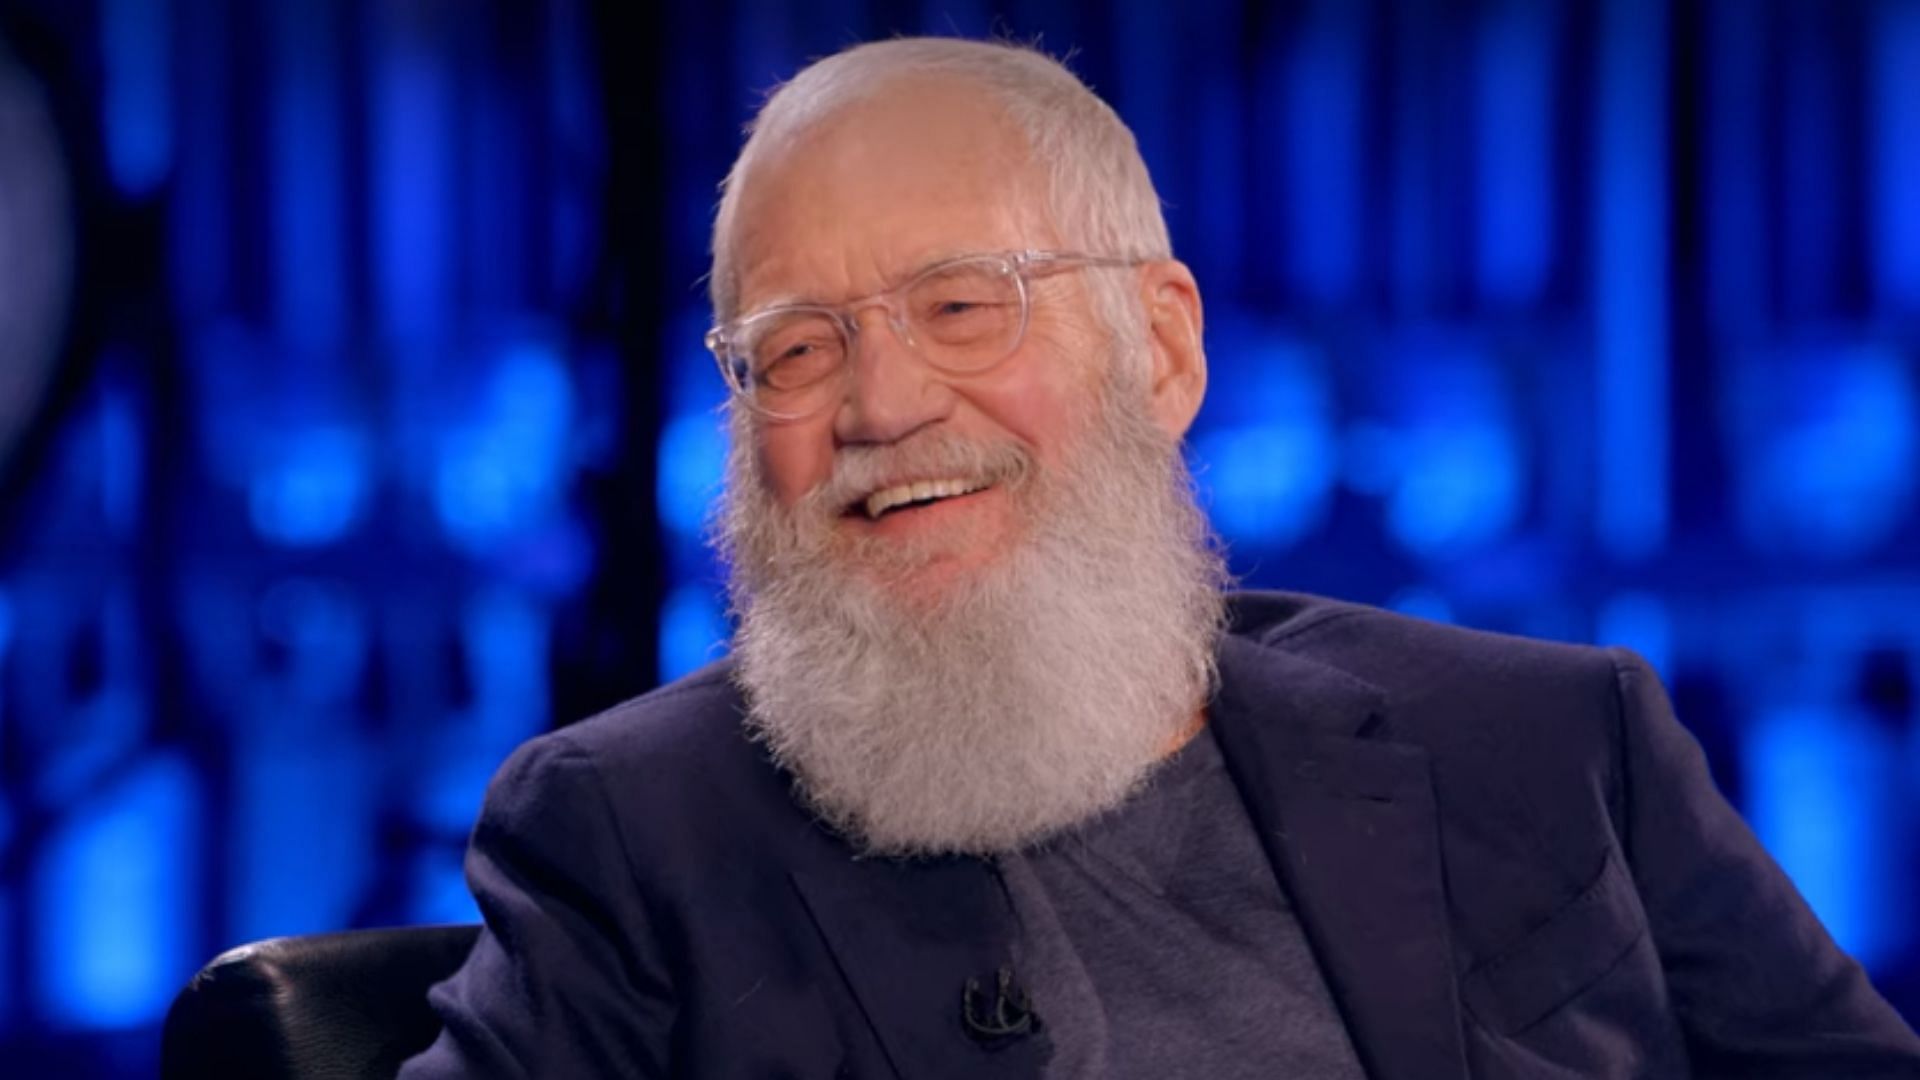 Identify] David Letterman's watch - my next guest with Shah Rukh